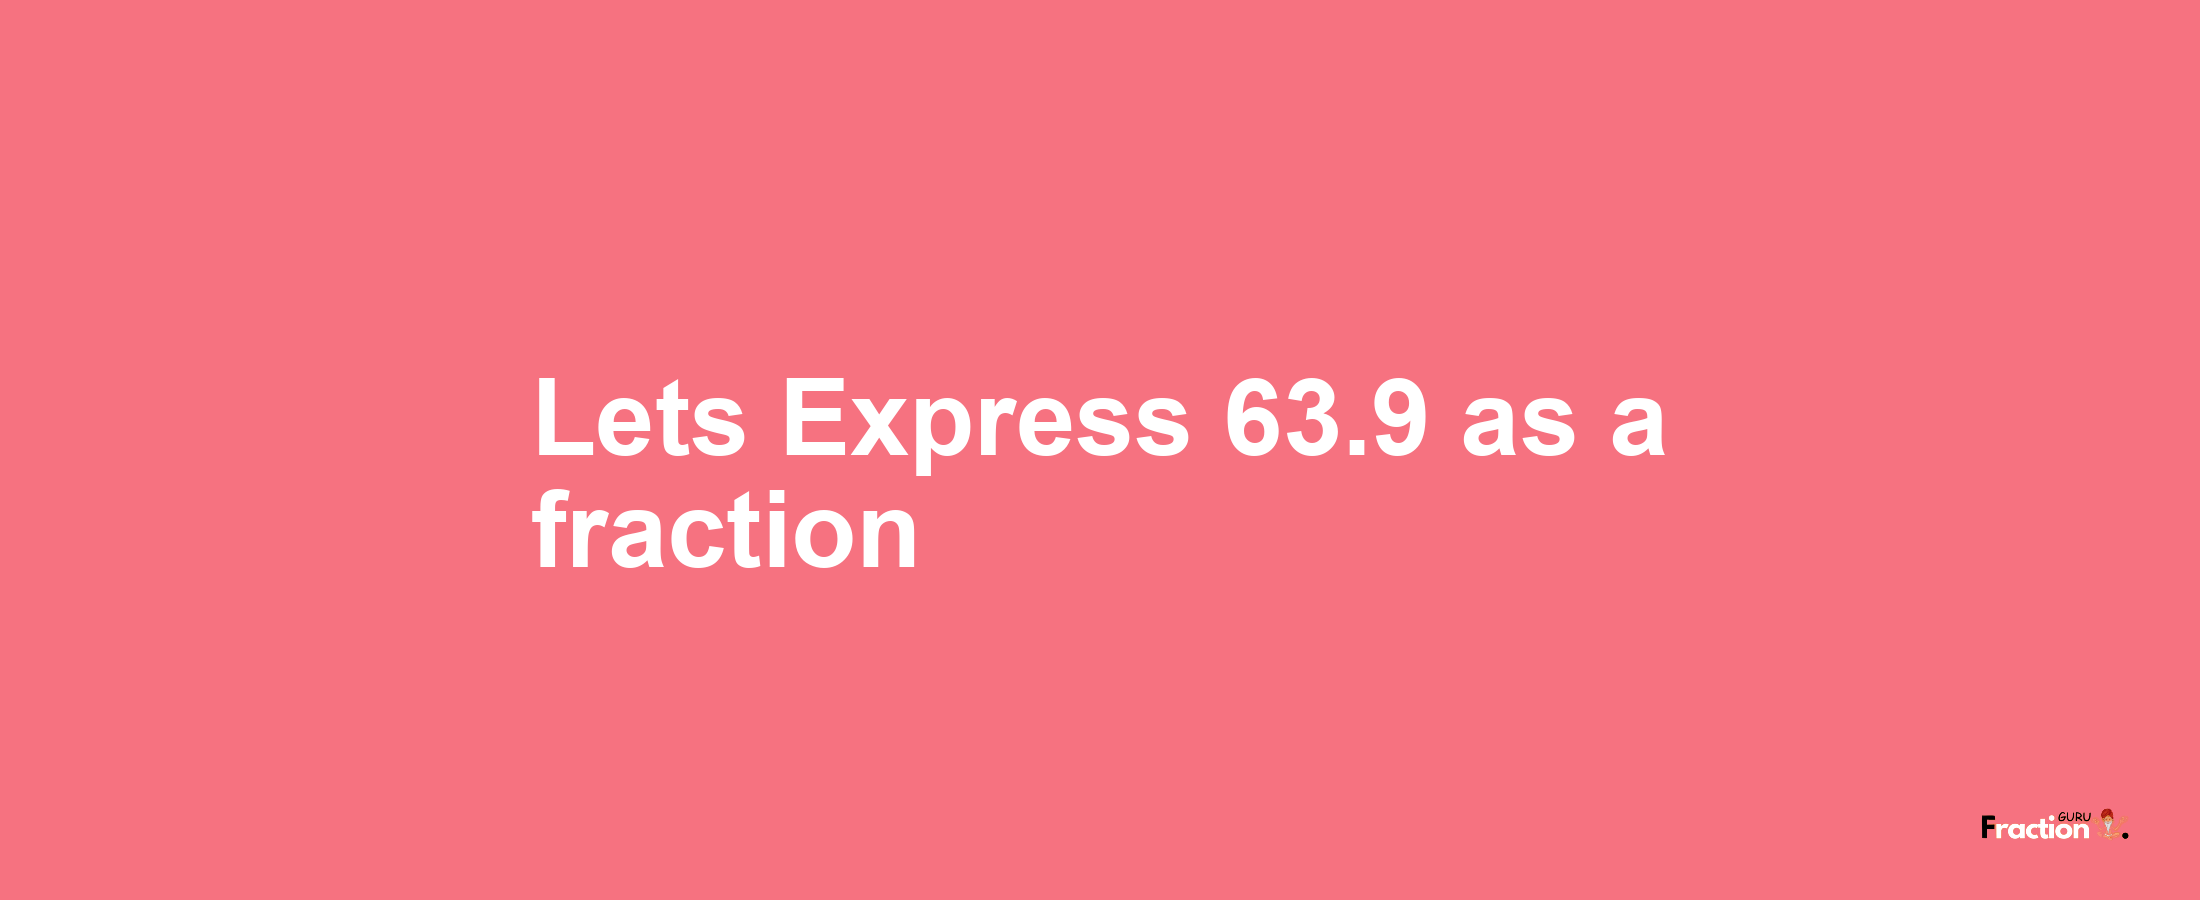 Lets Express 63.9 as afraction